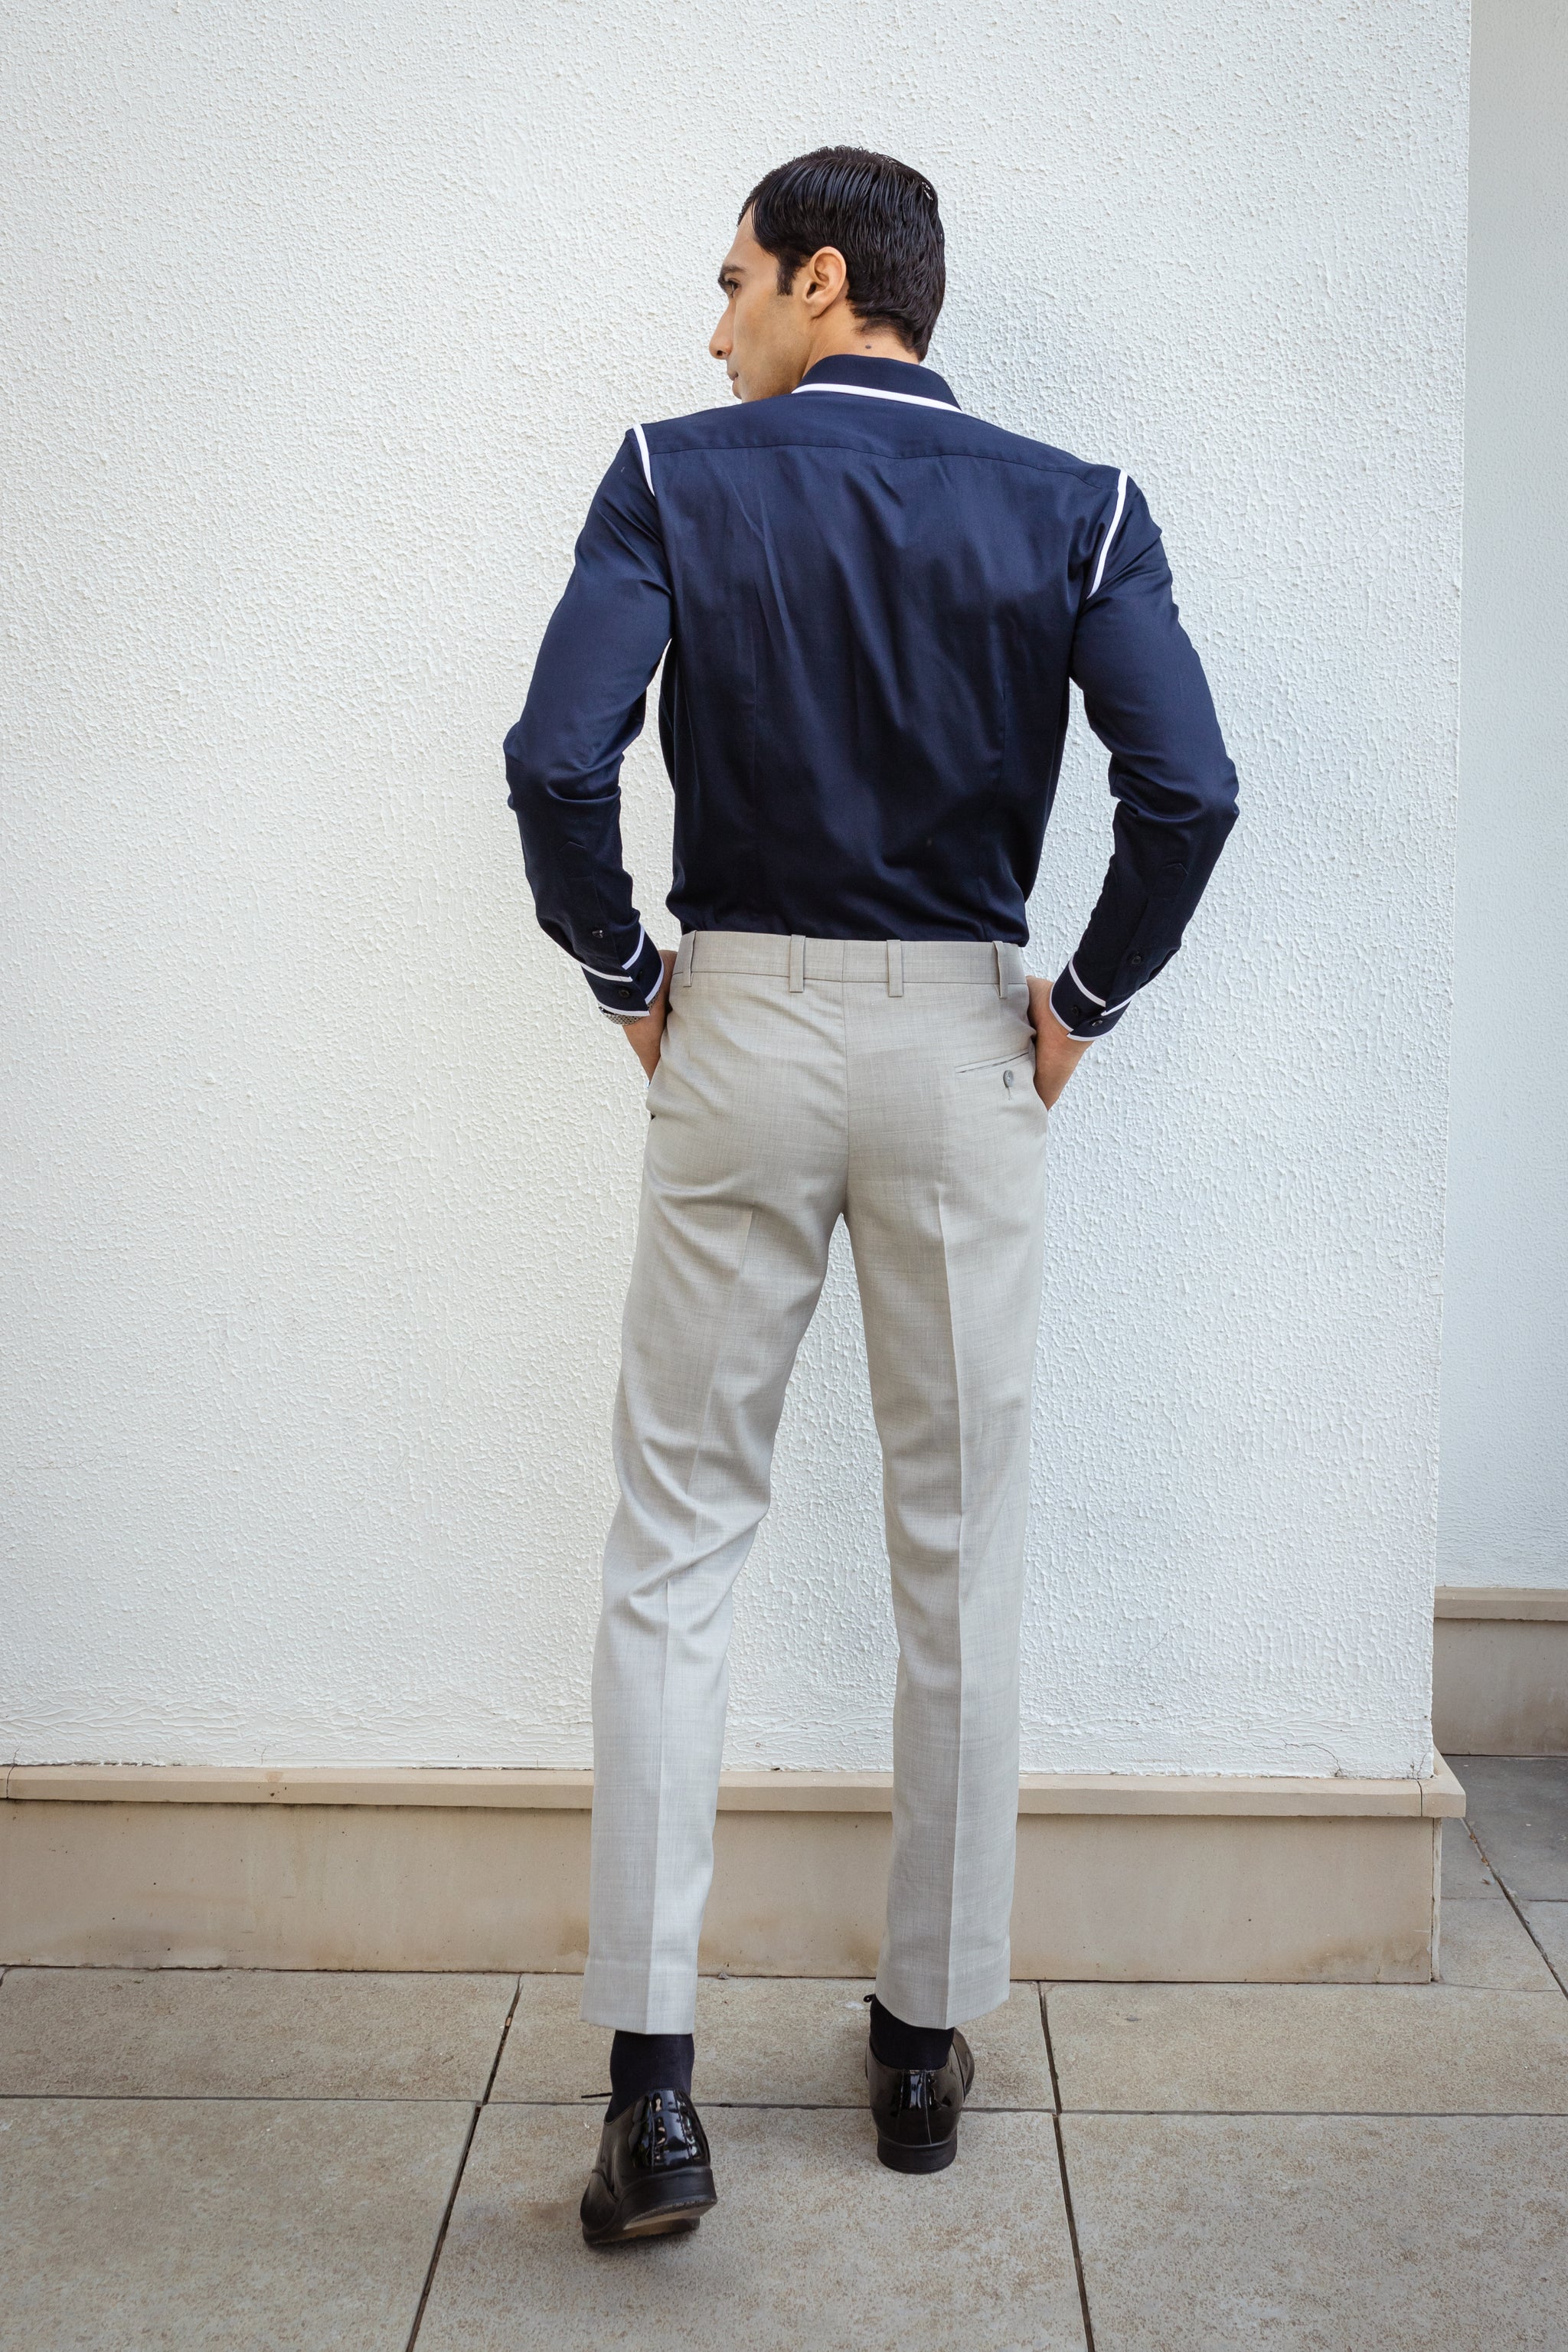 Navy Blue Shirt With White Line Detailing.